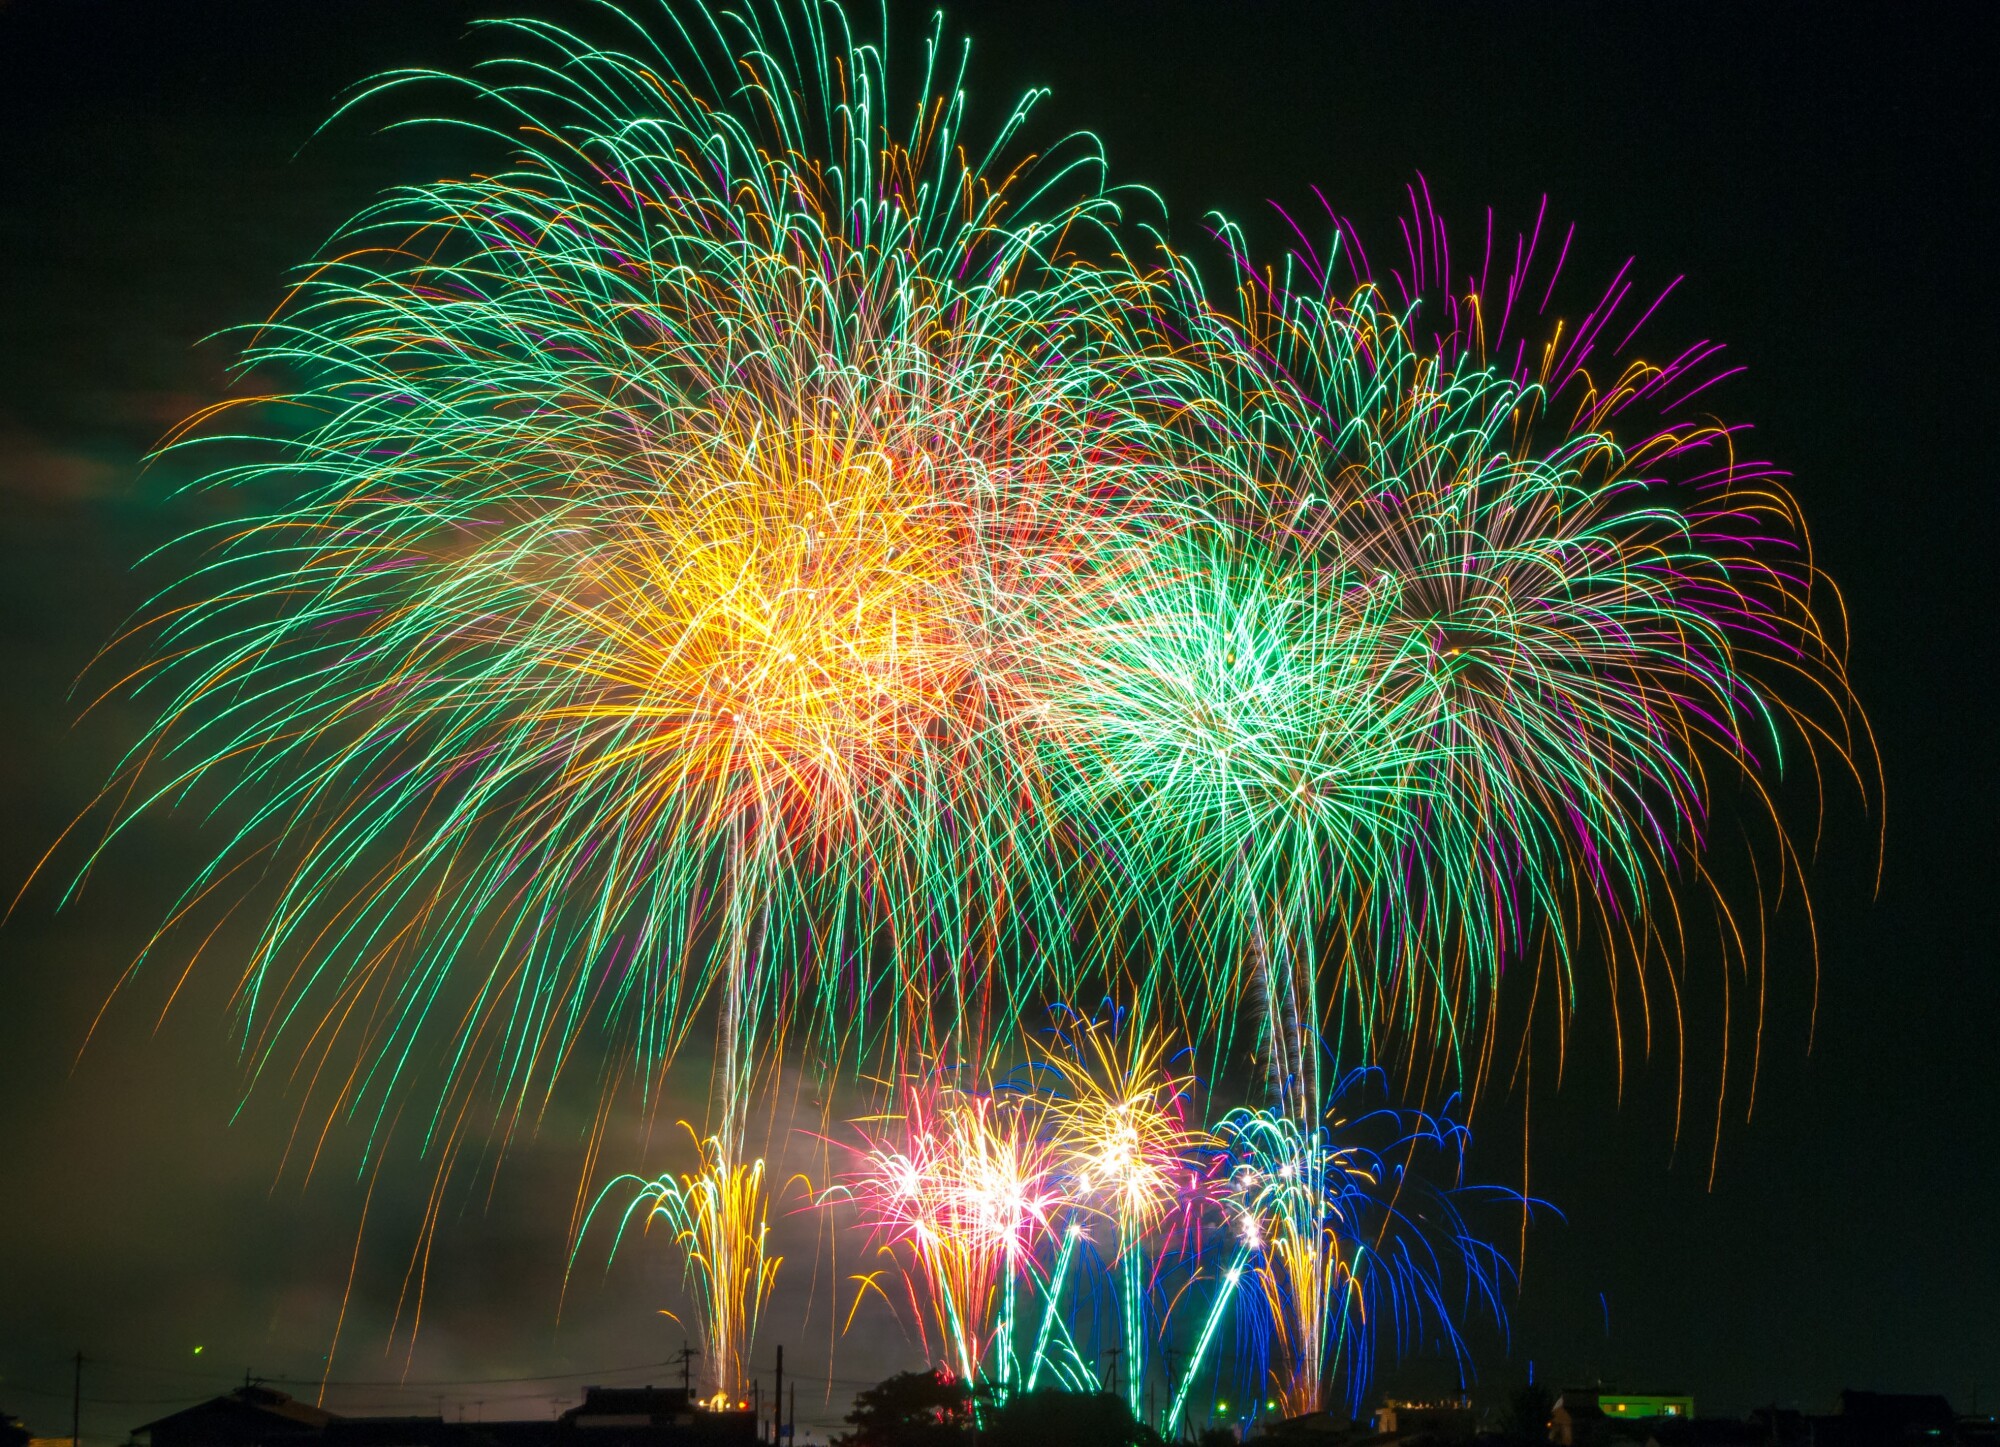 Are you thinking about buying fireworks for an upcoming event or party? Here's what you need to know before making your purchase.